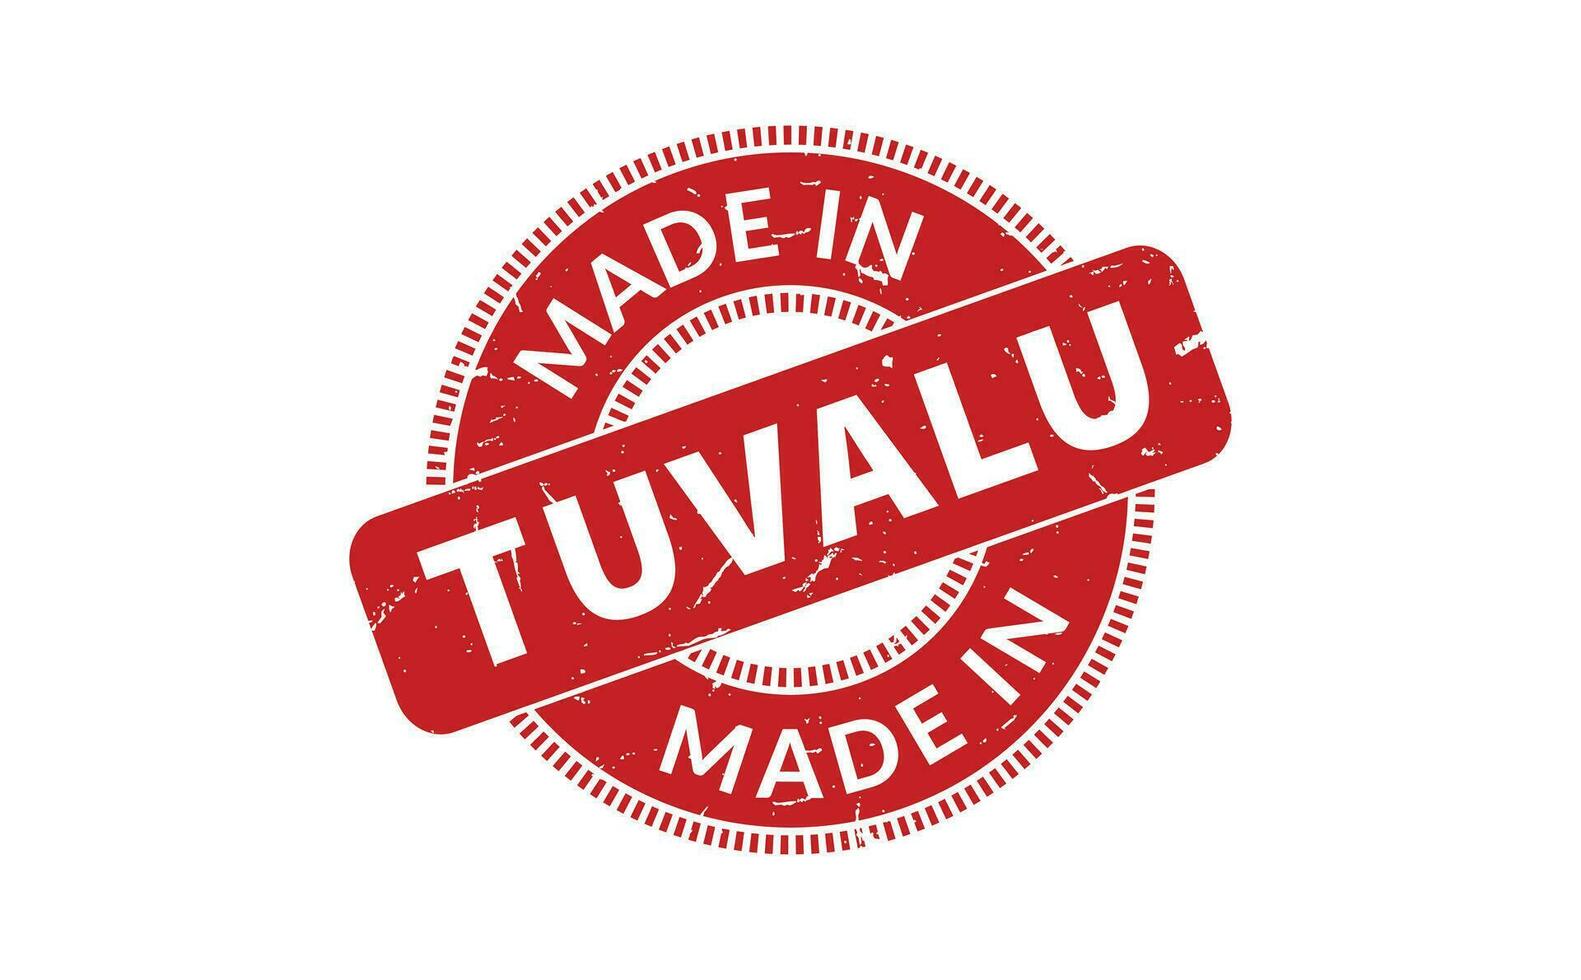 Made In Tuvalu Rubber Stamp vector